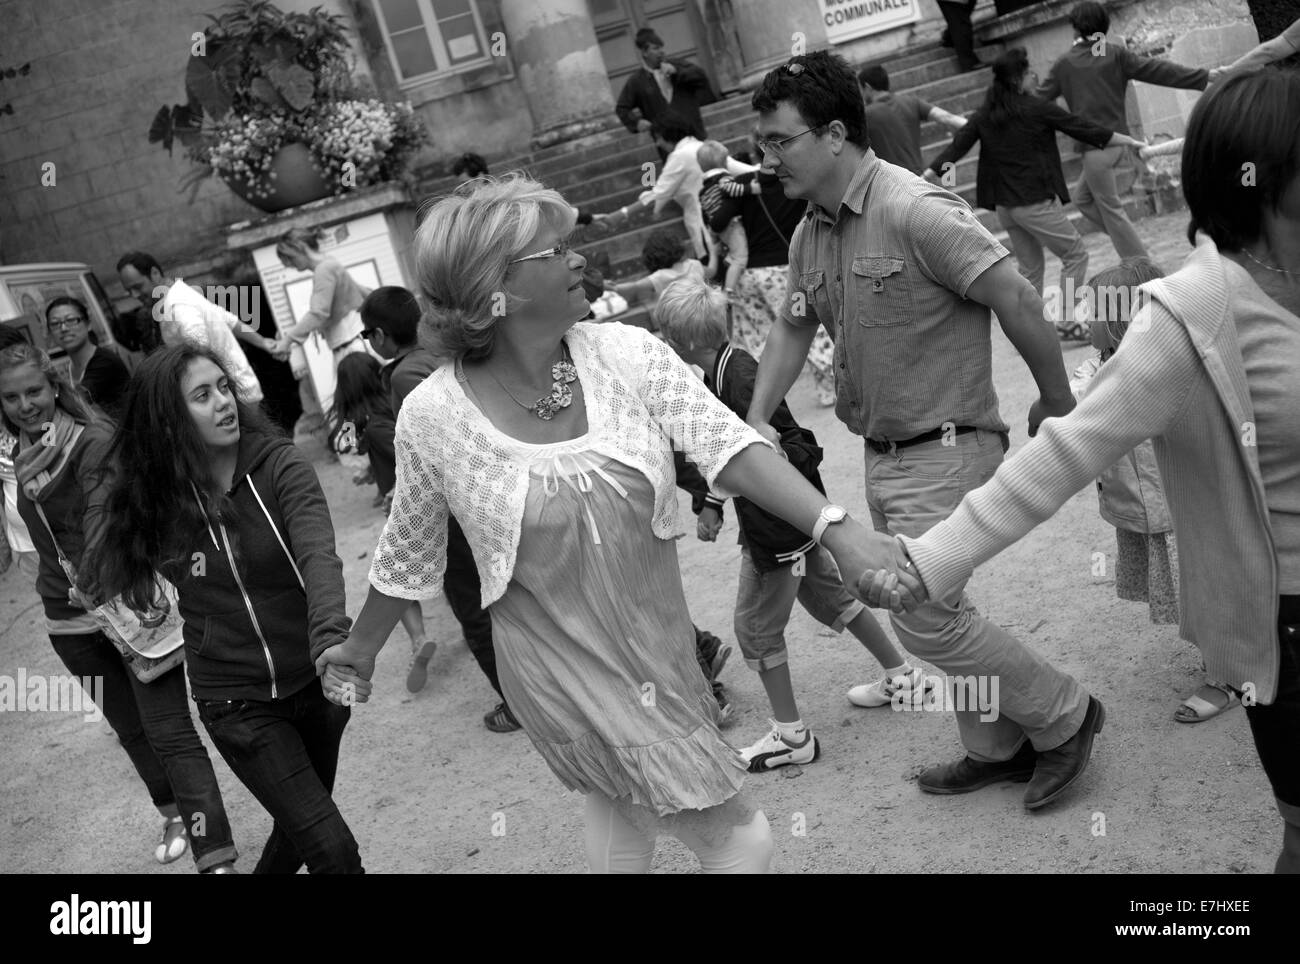 Dancing in the market square, Pont-l'Eveque, Normandy, France Stock Photo